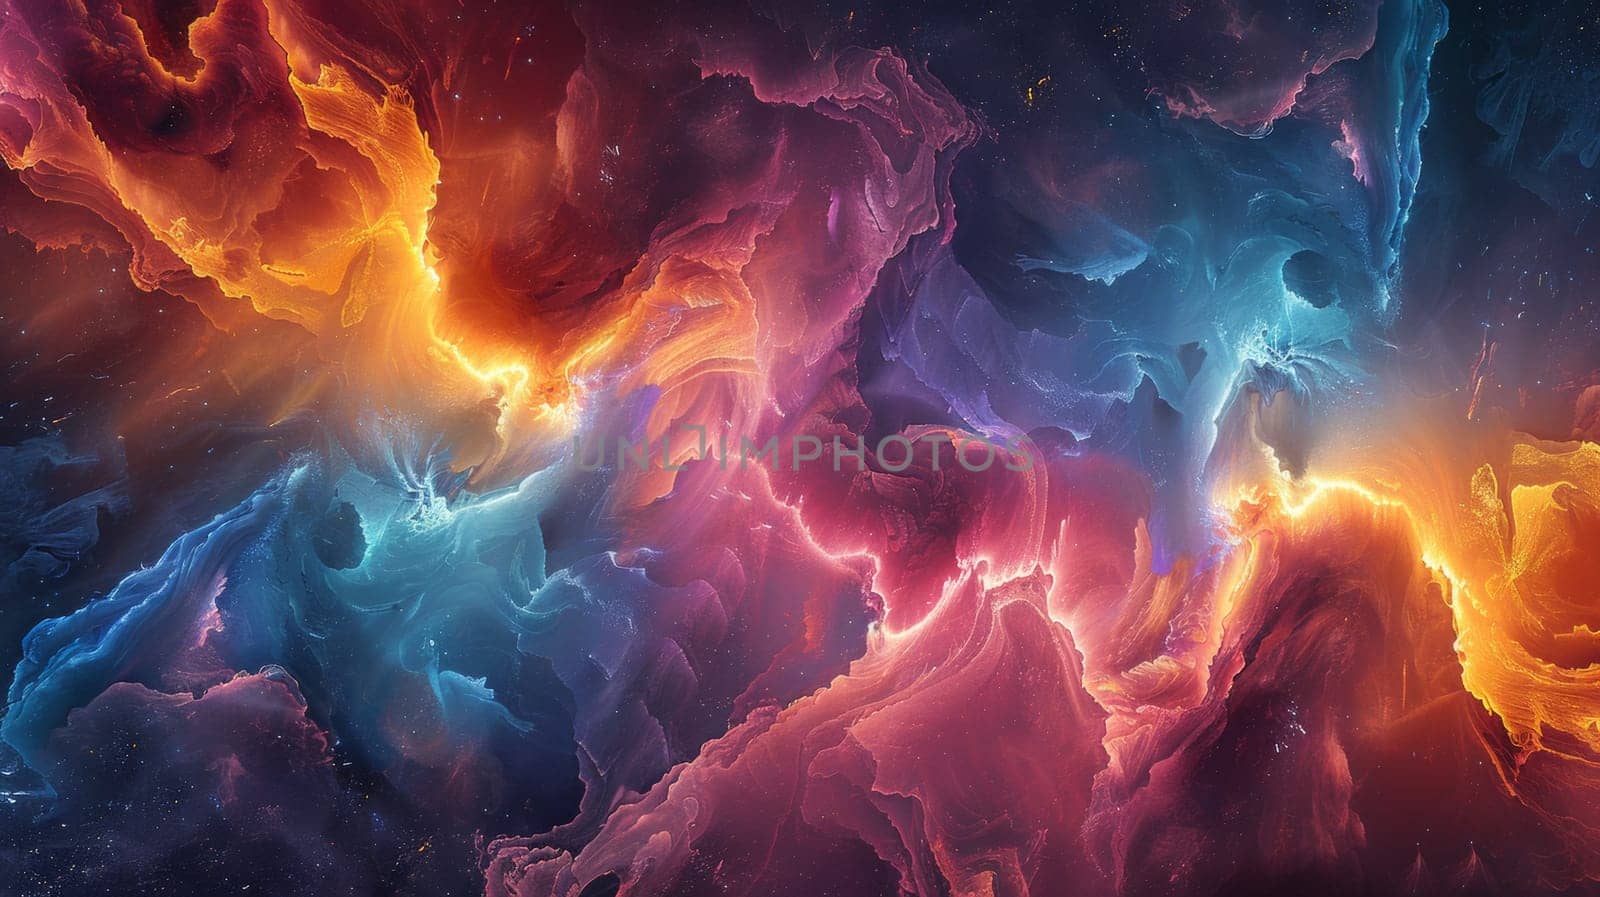 A colorful abstract painting of a space scene with many colors